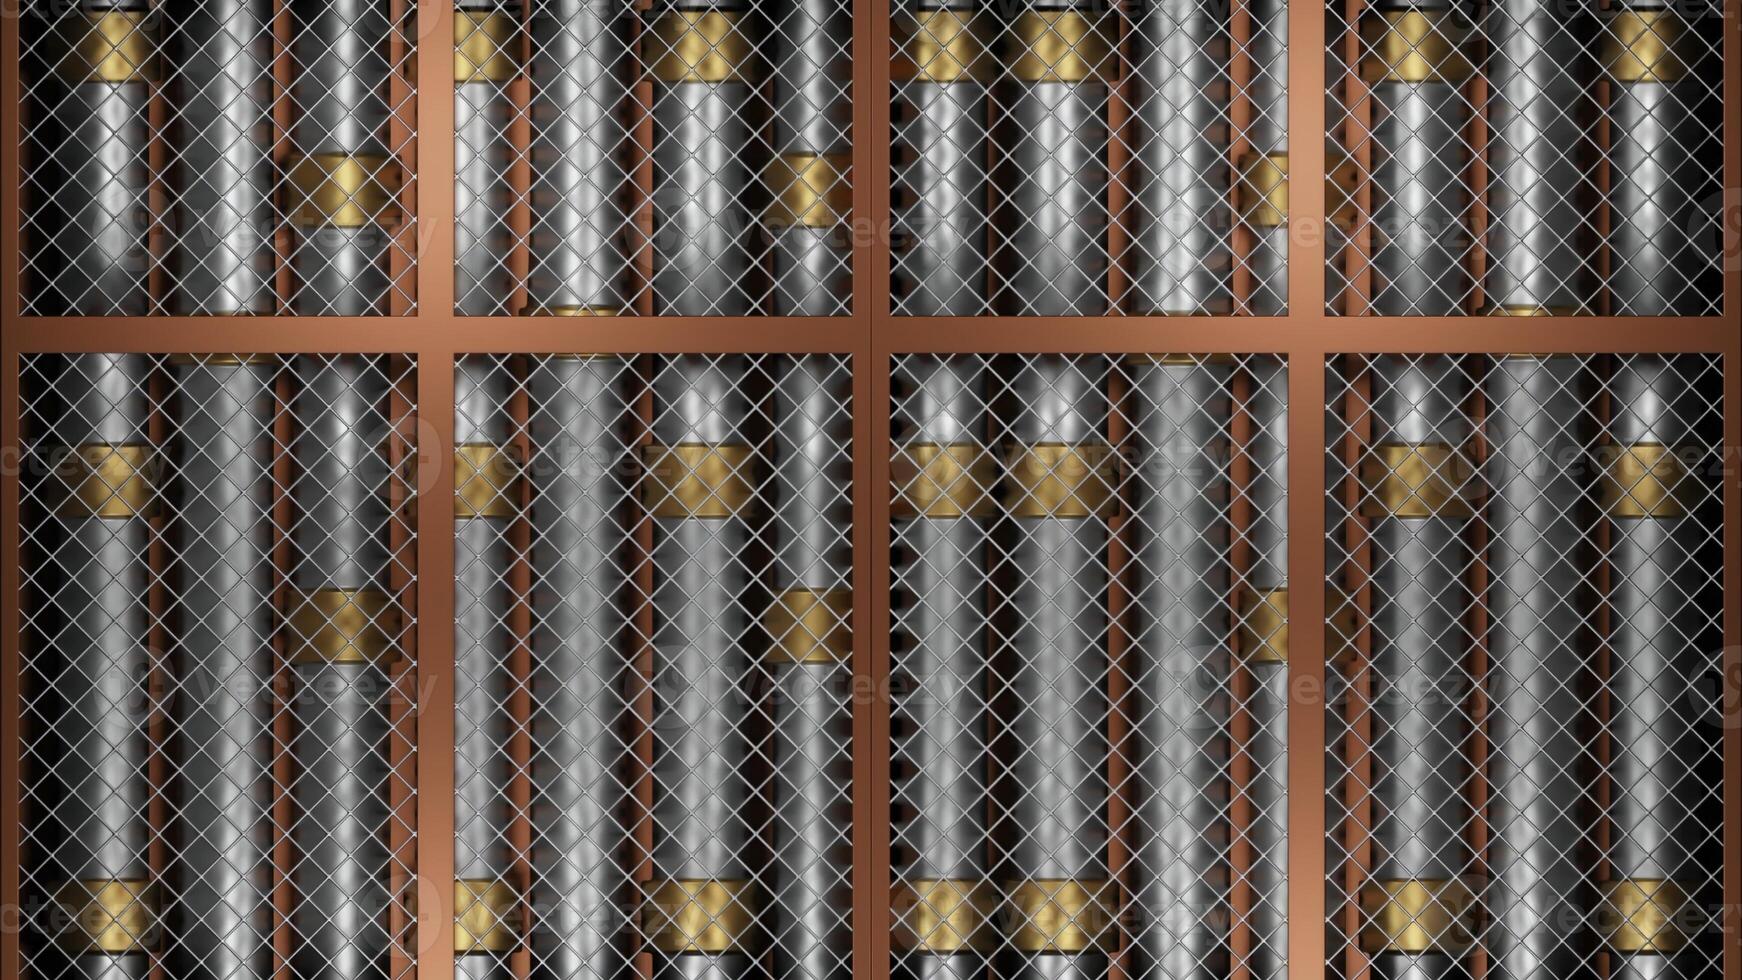 3D pipes with grid. Design. A lot of metal pipes behind grid. System with metal pipes and mesh for technical industry photo